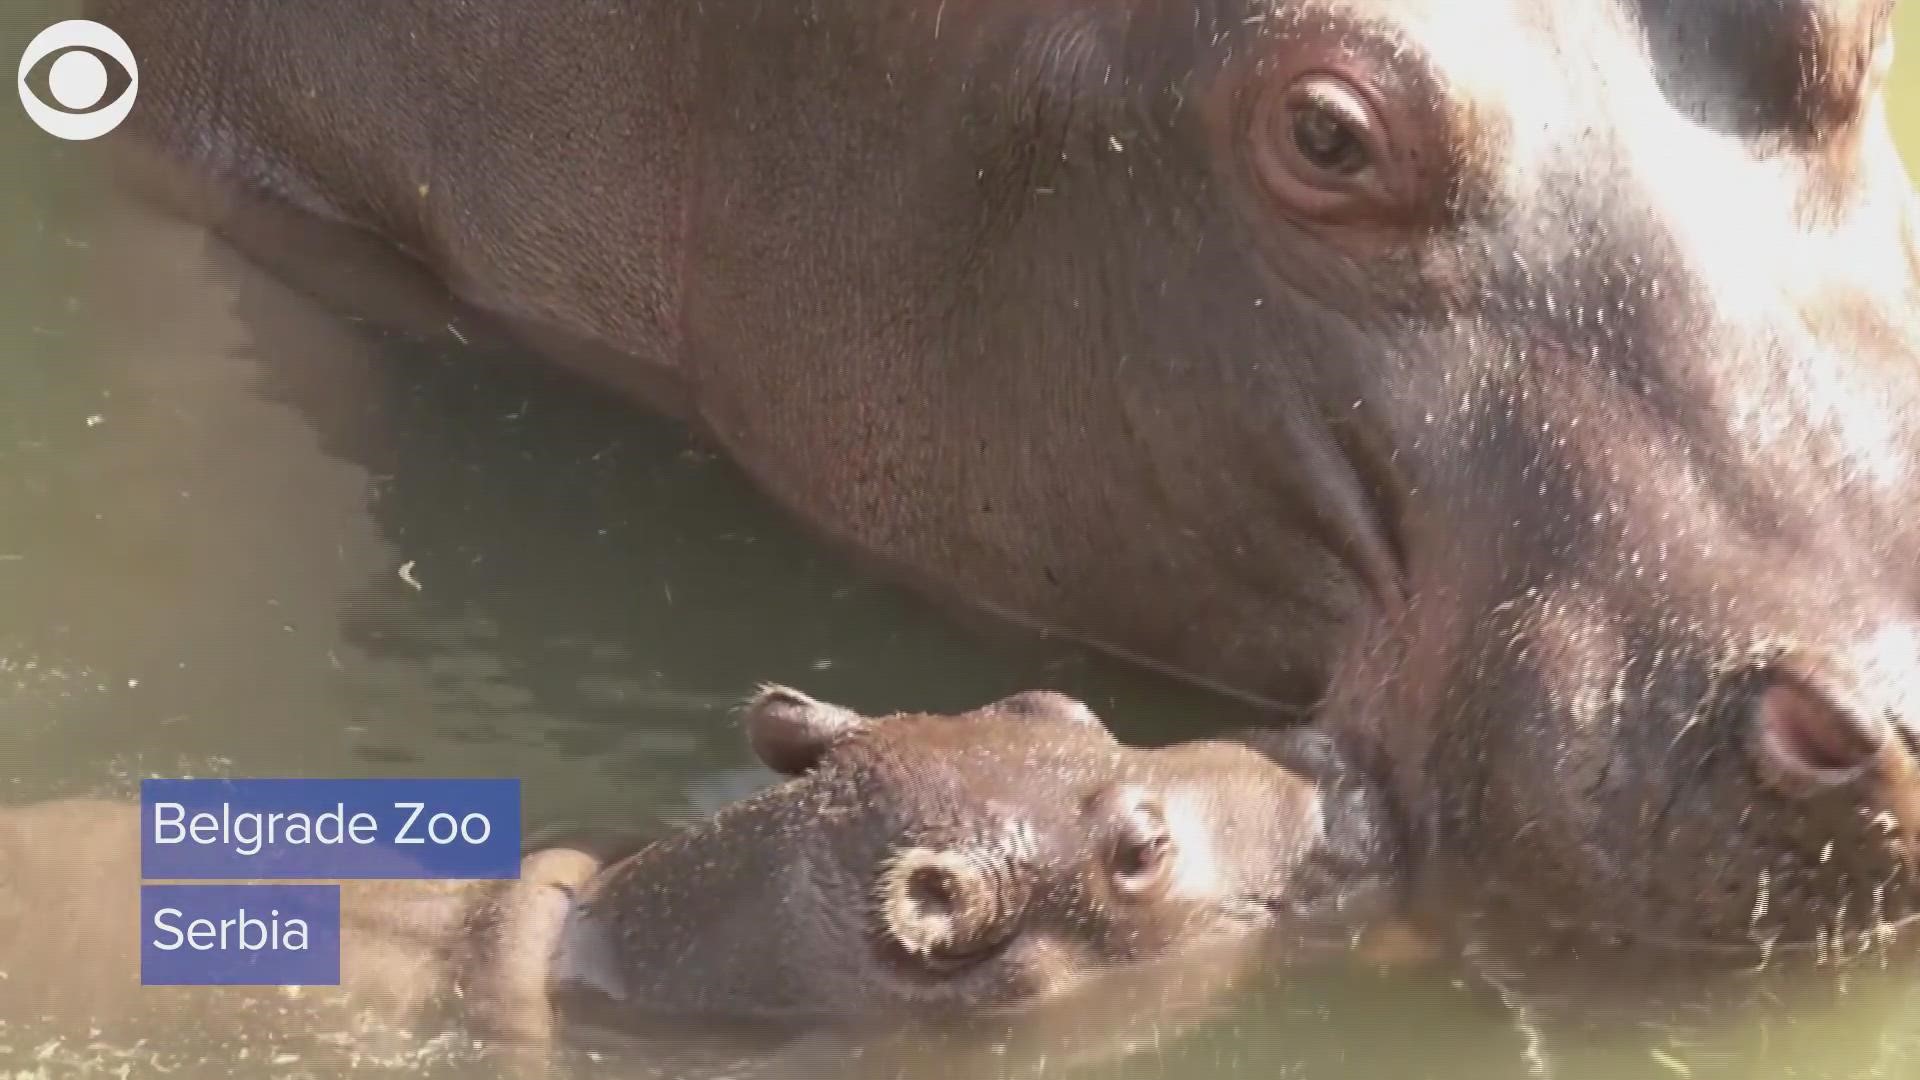 This little hippo enjoyed some quality time with mom at Belgrade Zoo on Thursday (9/9). The zoo says the baby is about 110 pounds and was born in August